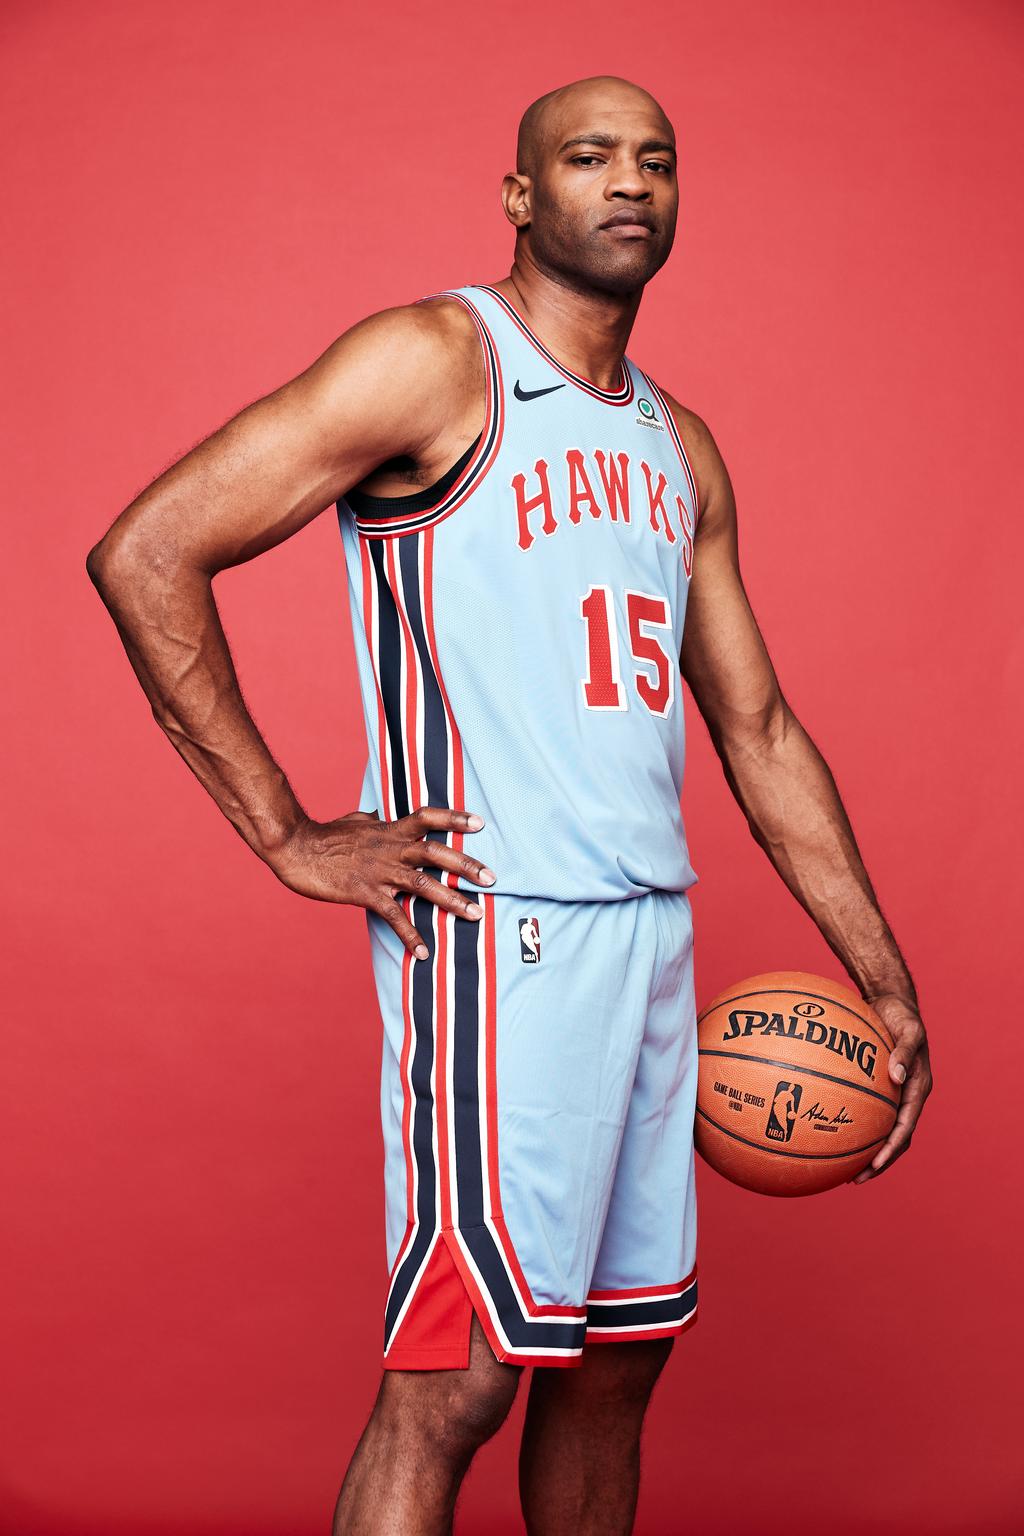 Atlanta Hawks: Young's jersey sales reach highest ranking of his